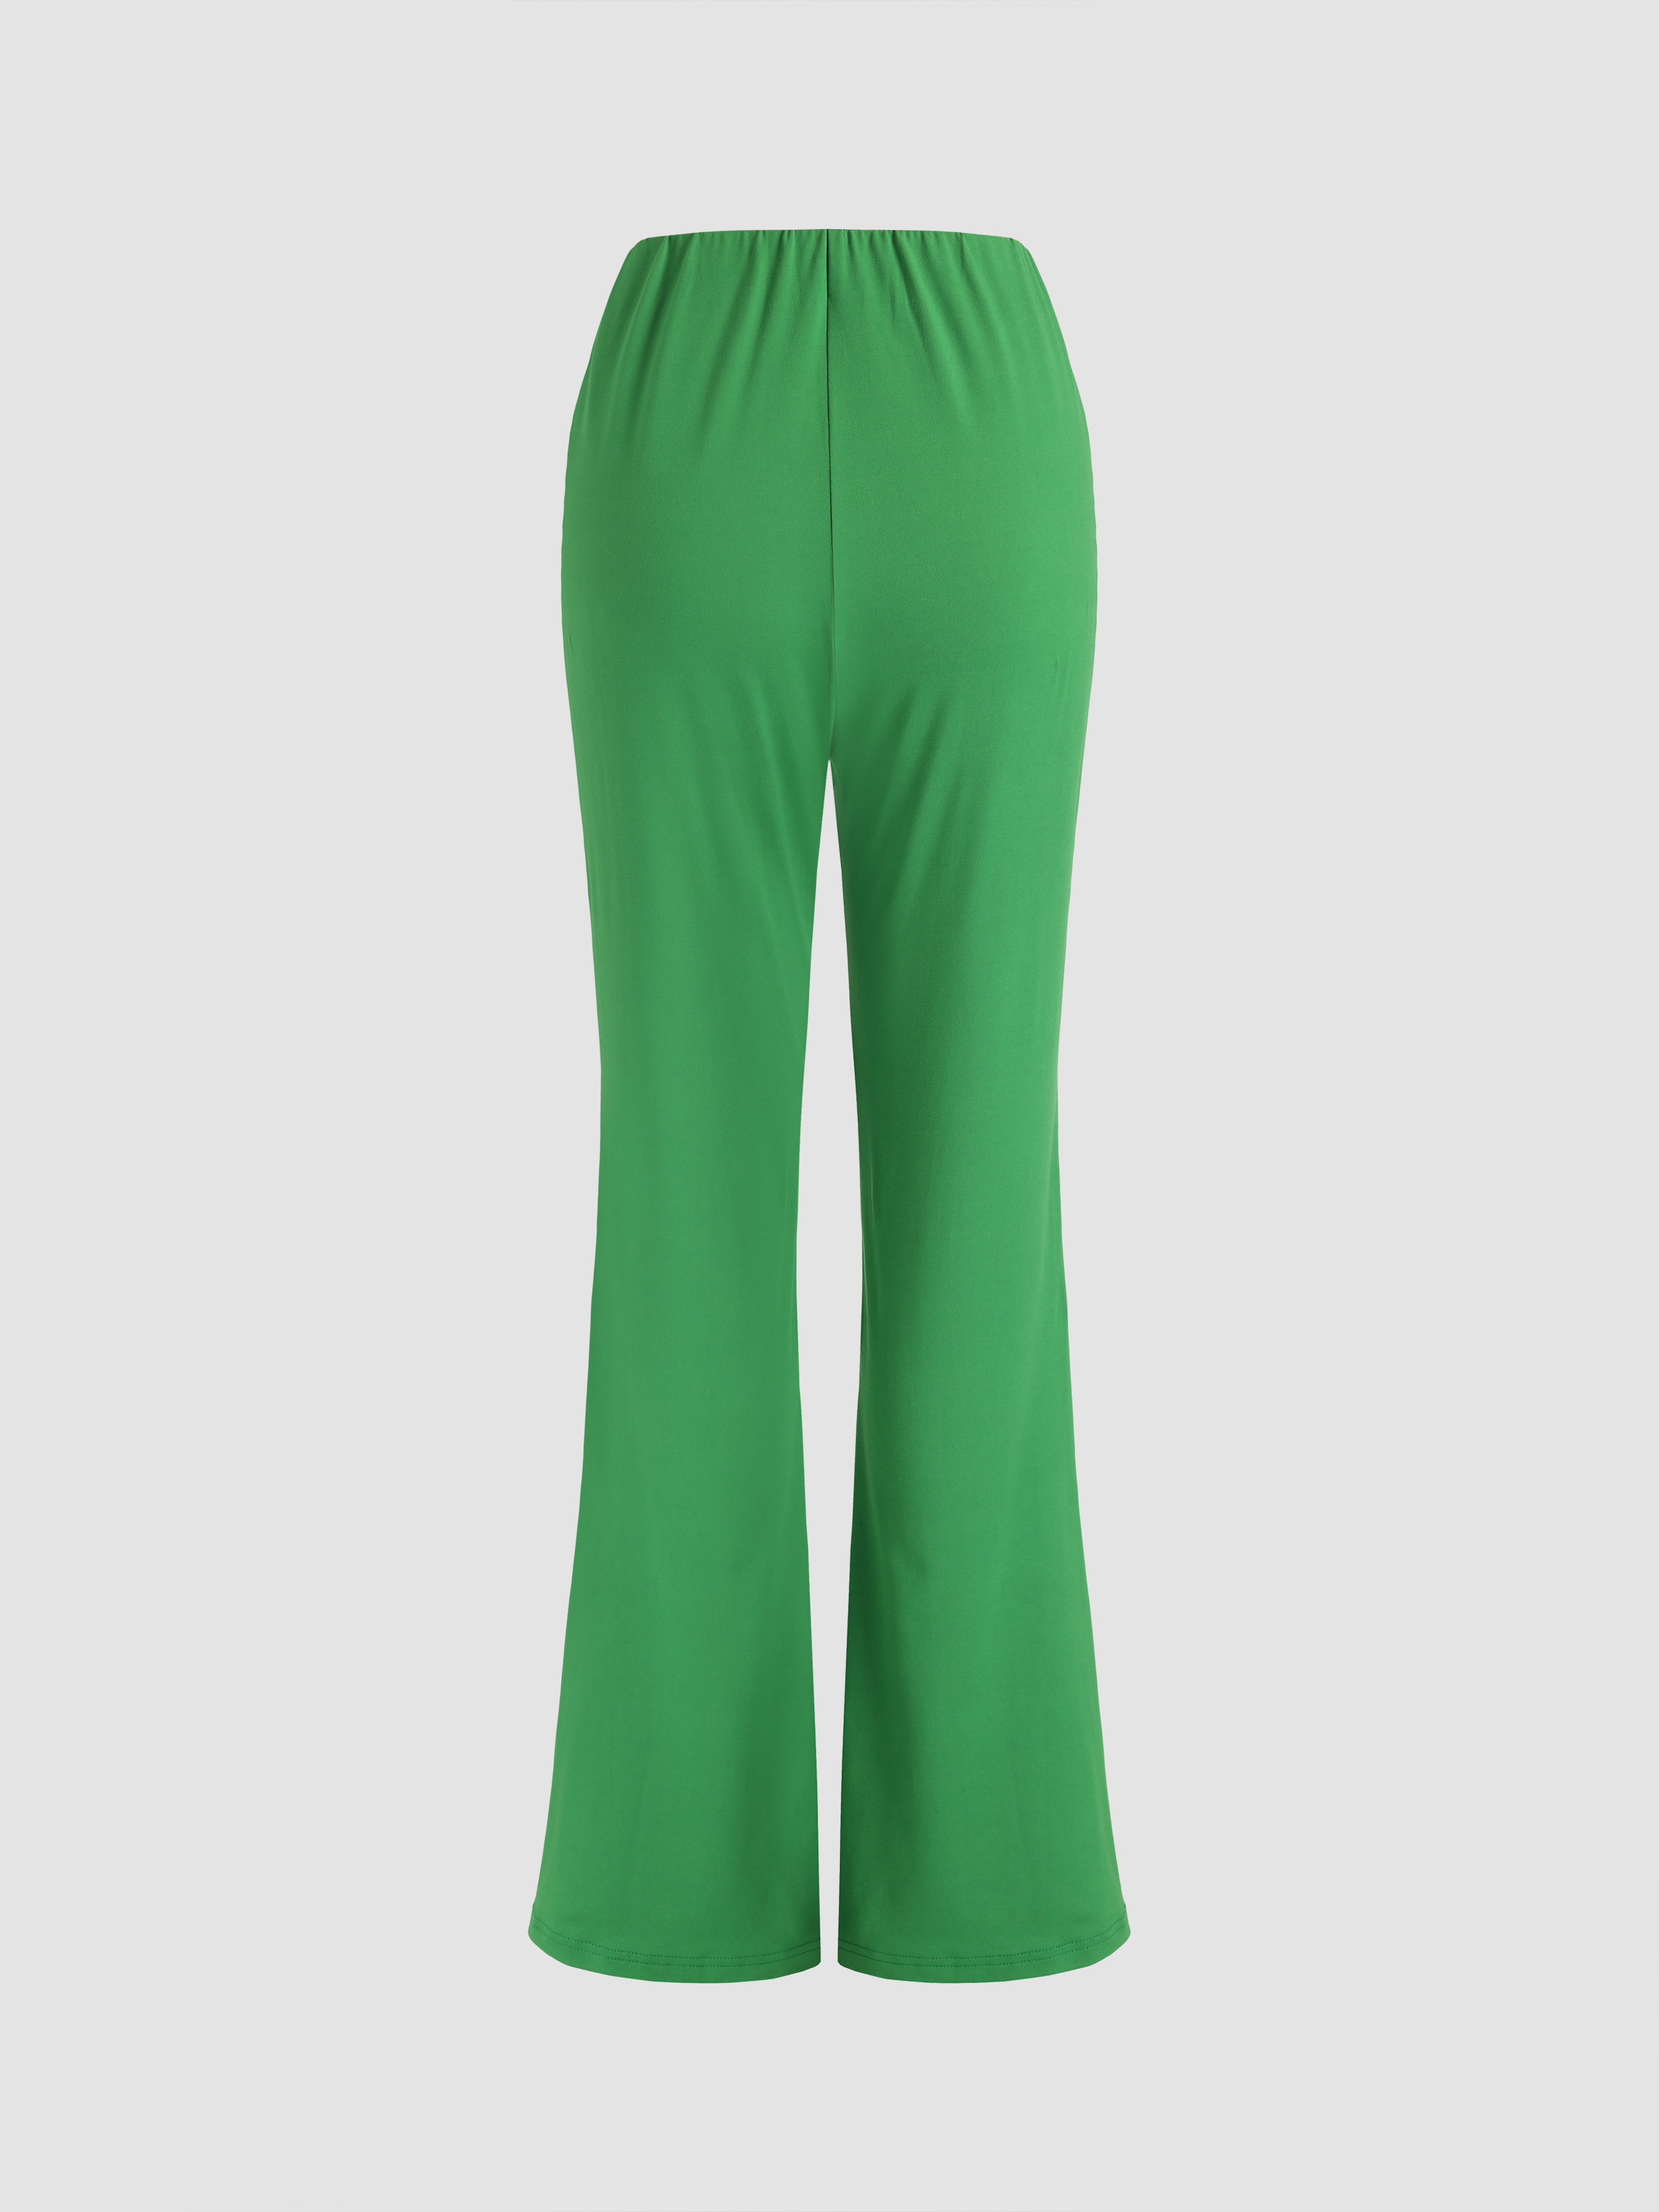 Green High-Rise Trousers - Straight Leg Pants - Office Chic - Lulus